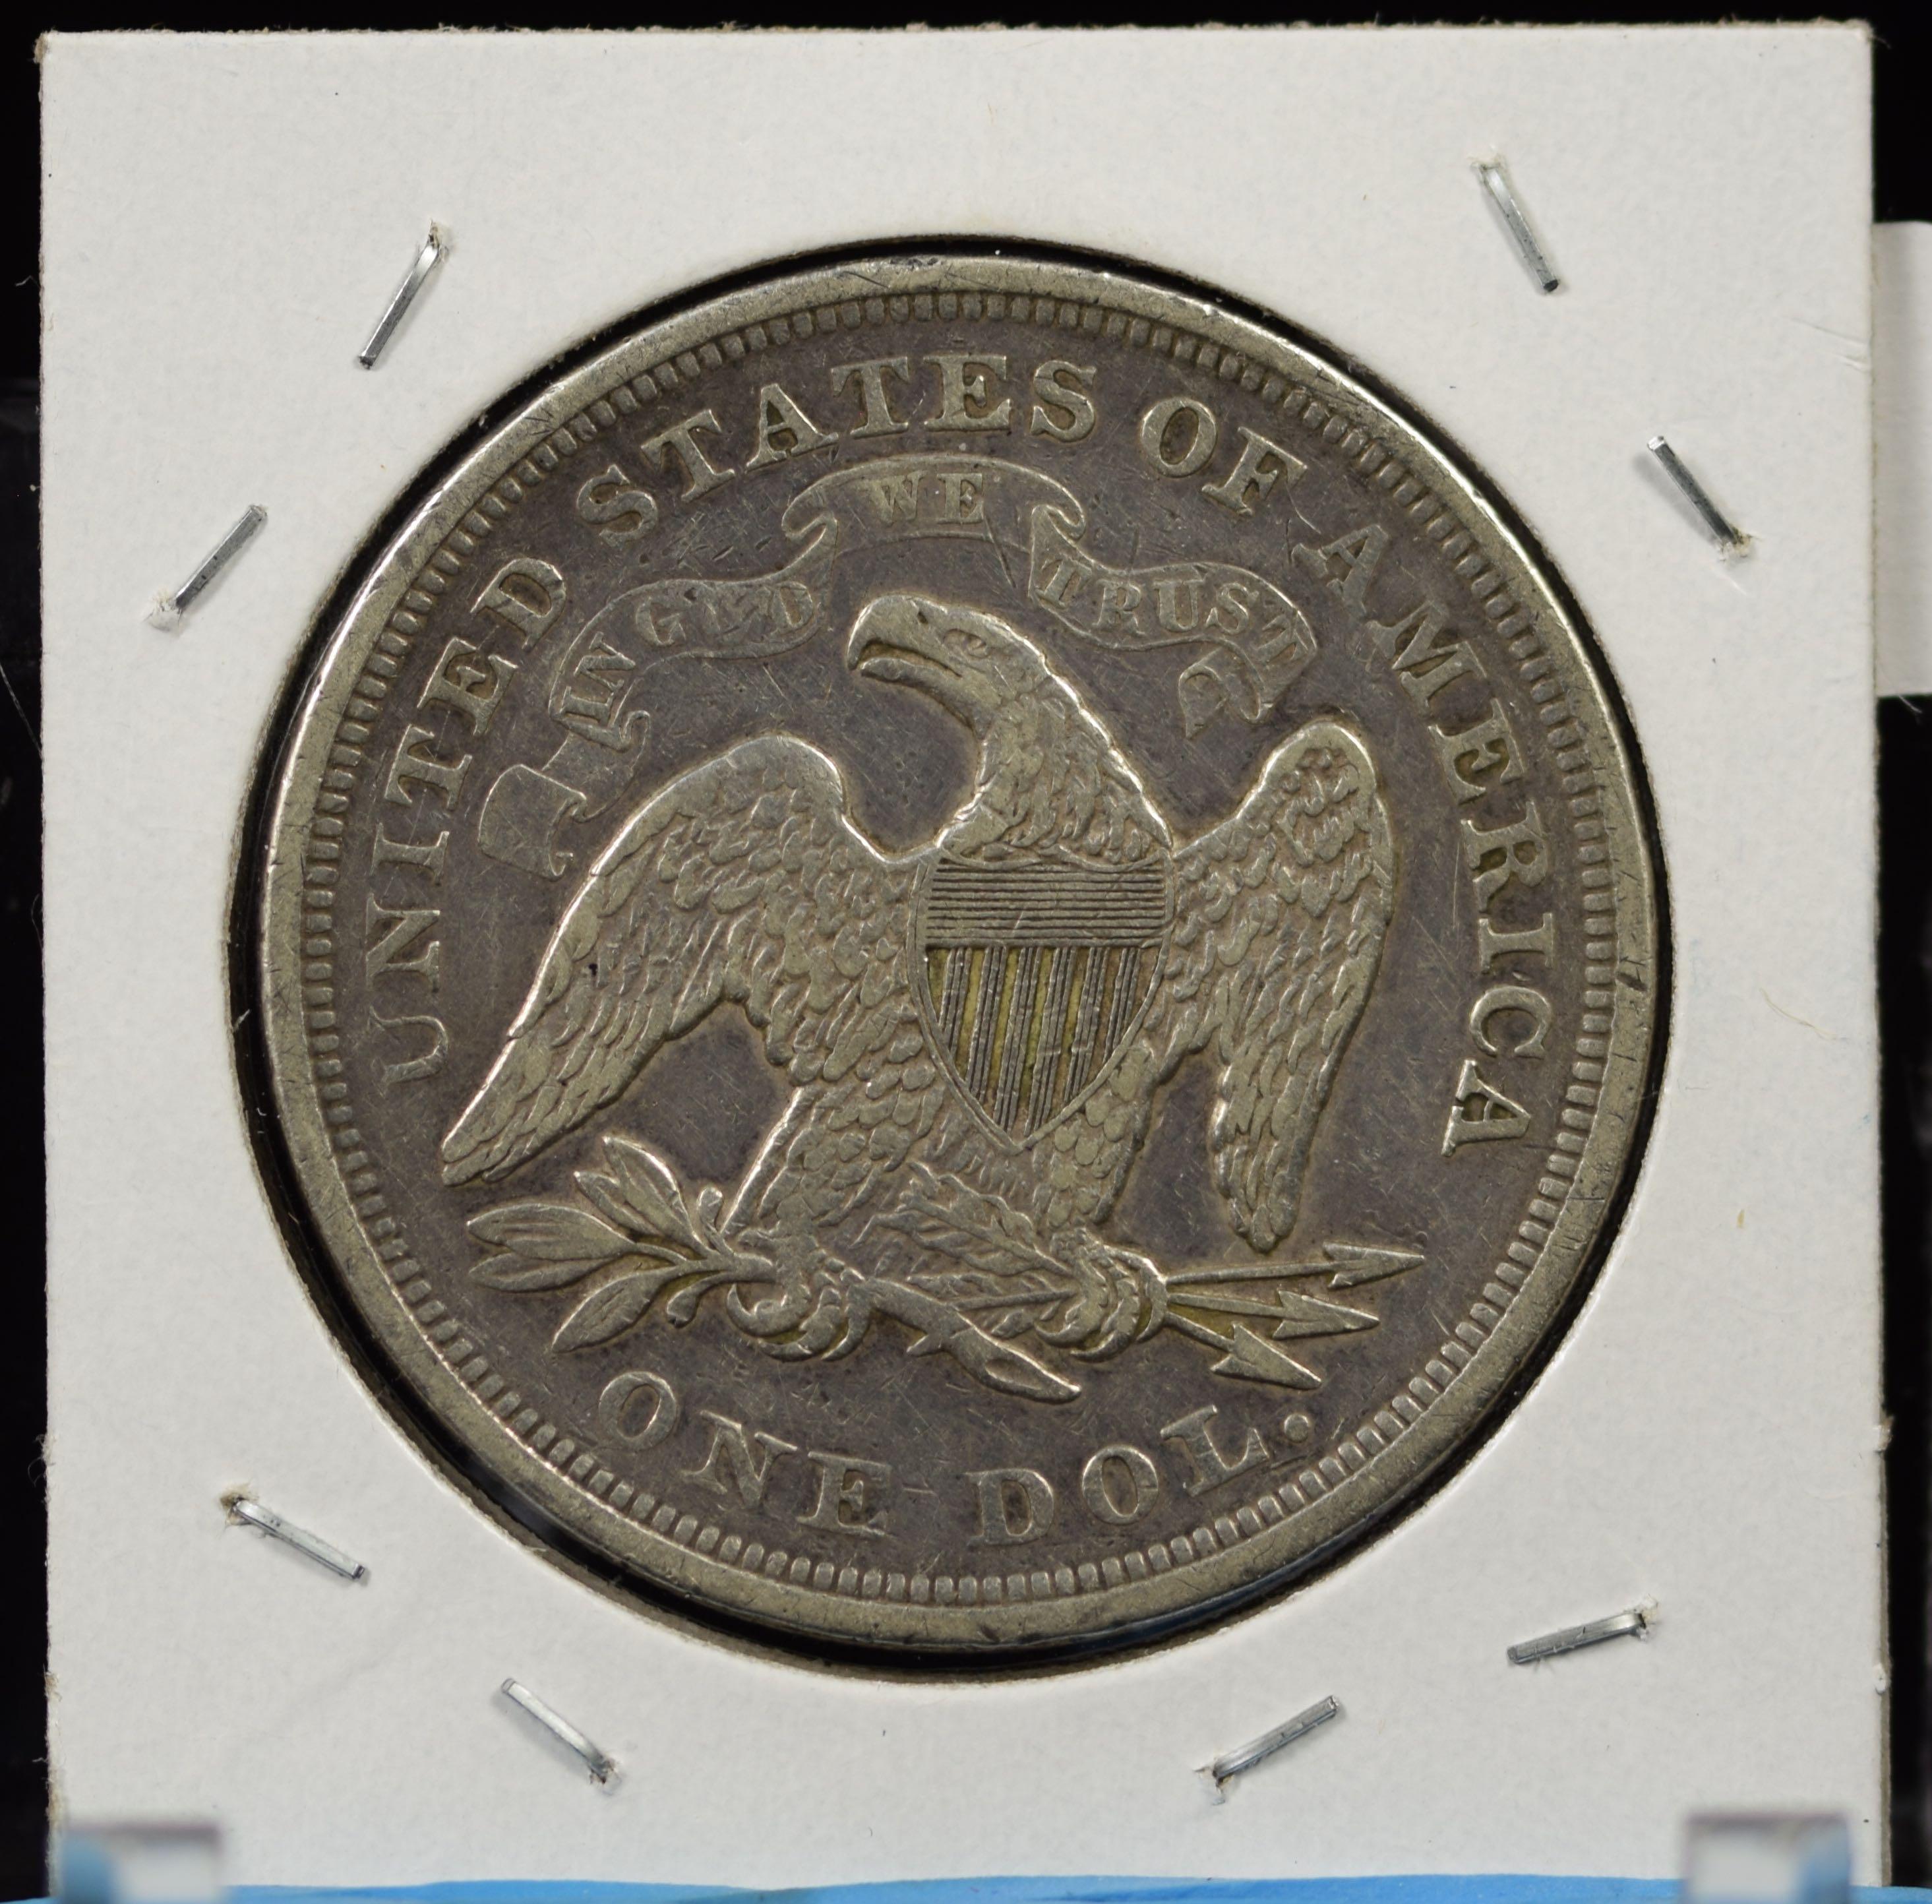 1871 Seated Liberty Dollar Low mintage VF/XF